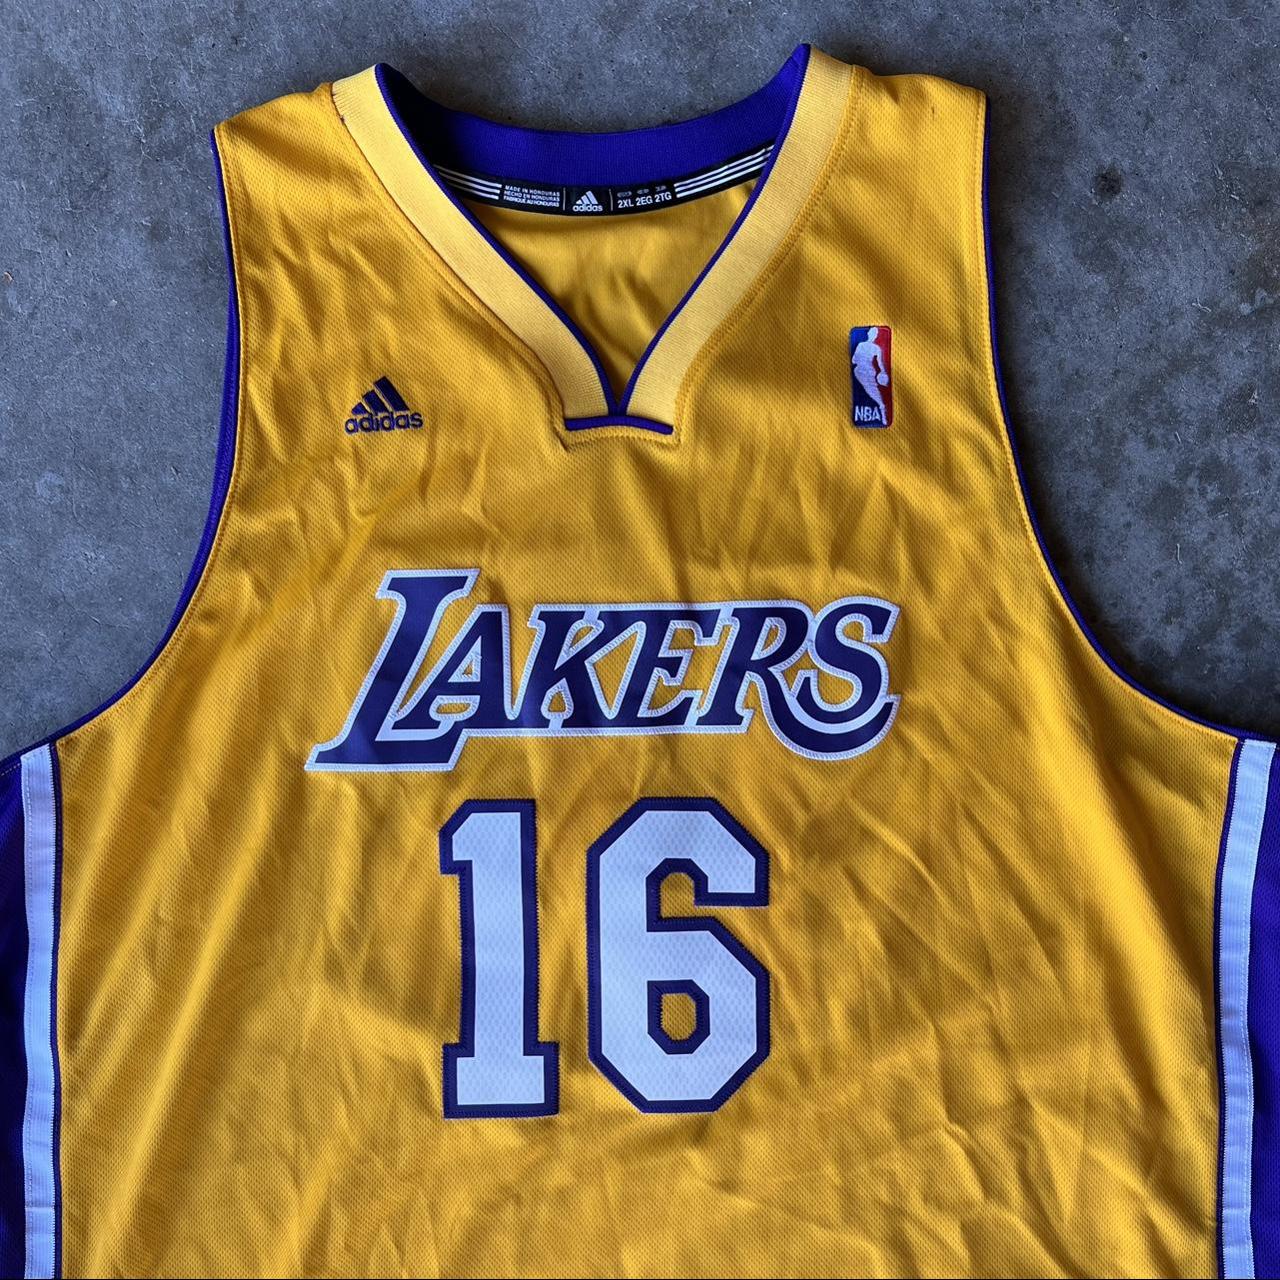 2015/16 nba lakers away jersey. Classic gold and - Depop